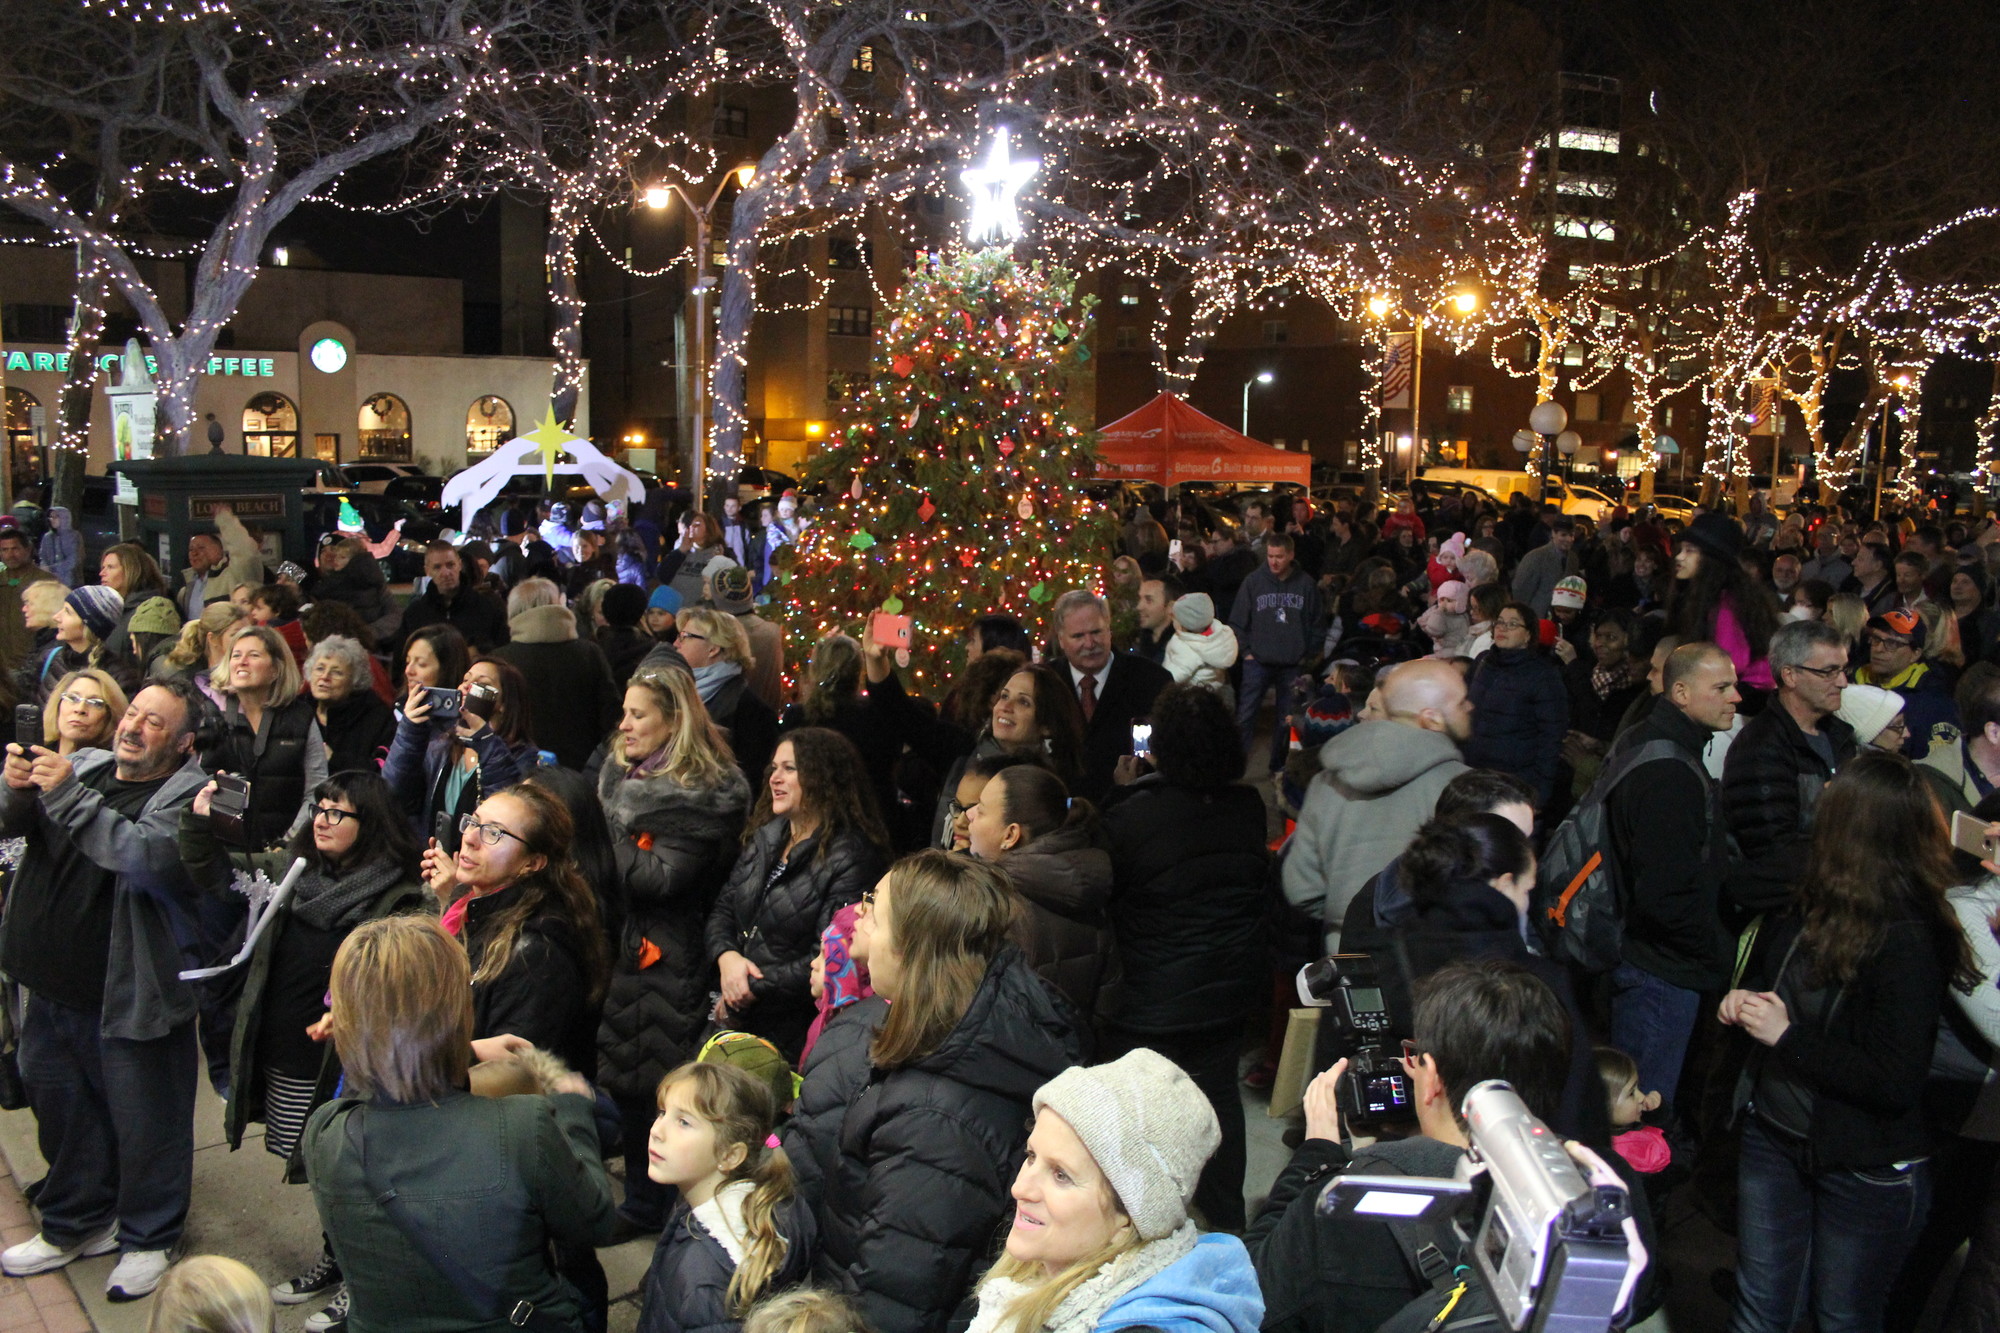 Photos by Christina Daly/Herald
Hundreds crowded Kennedy Plaza last Friday for the city’s annual tree lighting ceremony, complete with an outdoor ice skating rink and a visit from Santa.